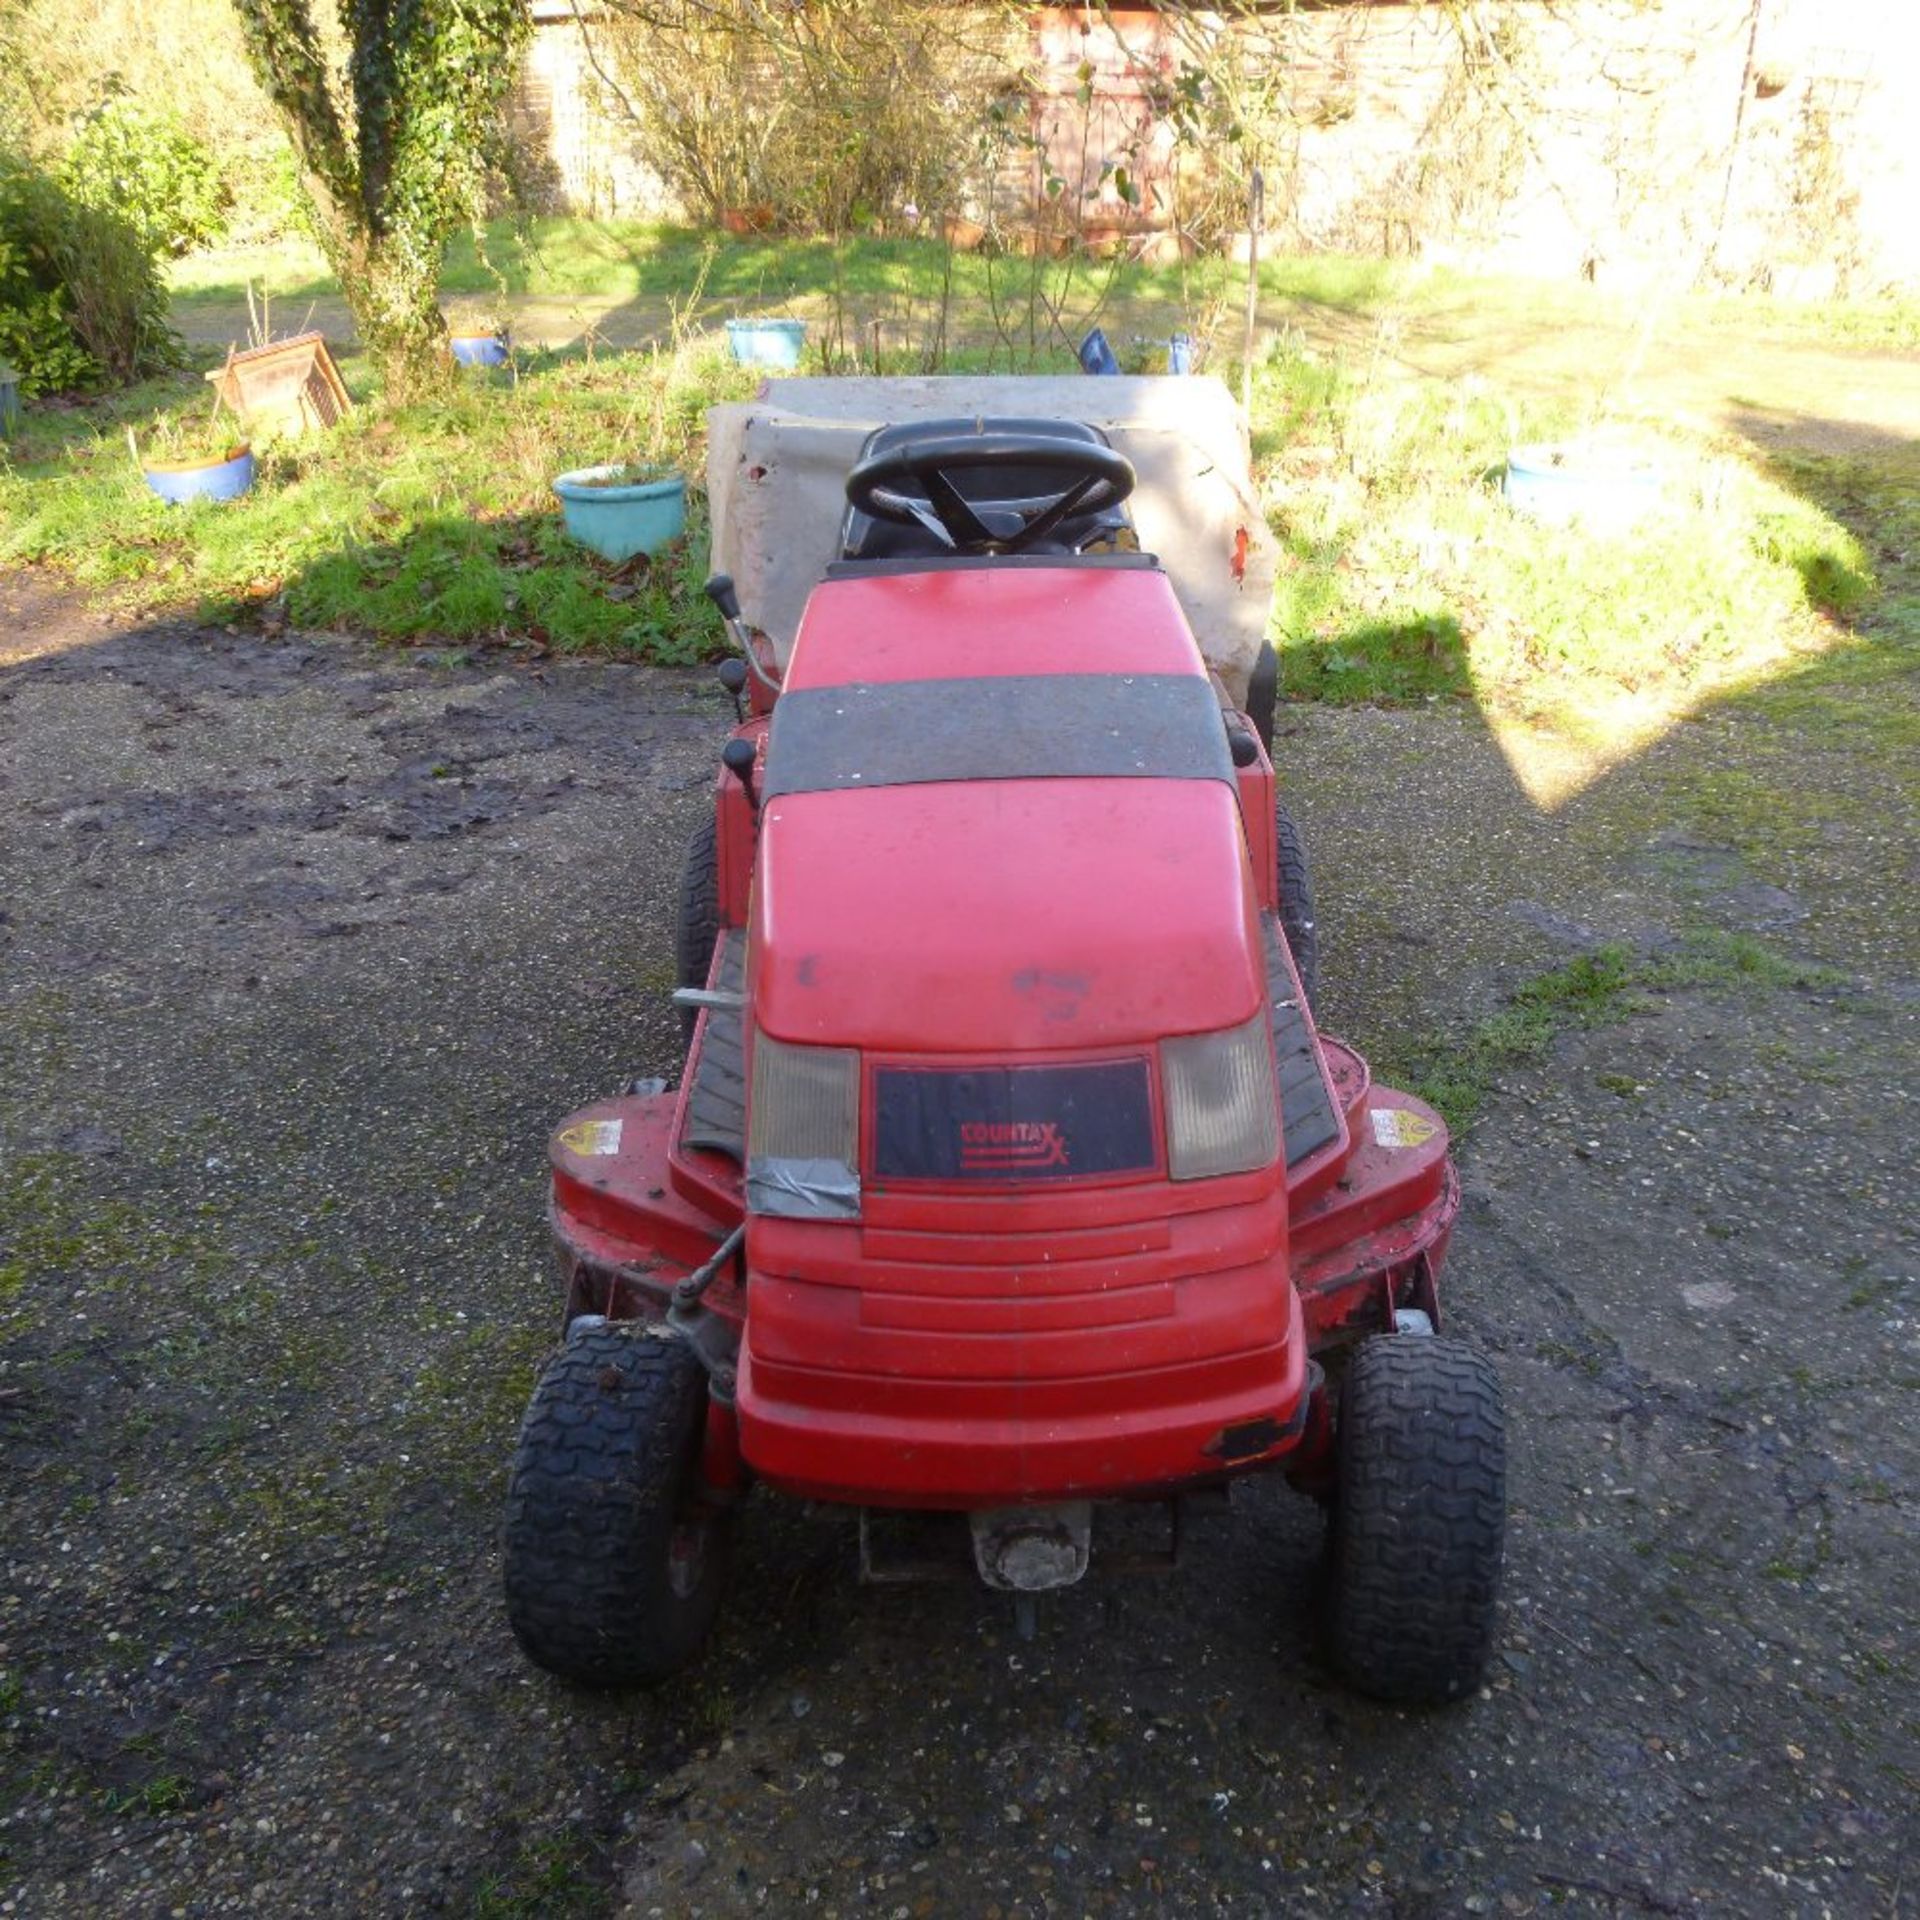 Countax ride on lawn mower K18, model no: 303777, type: 0017-03 7353, - Image 3 of 4